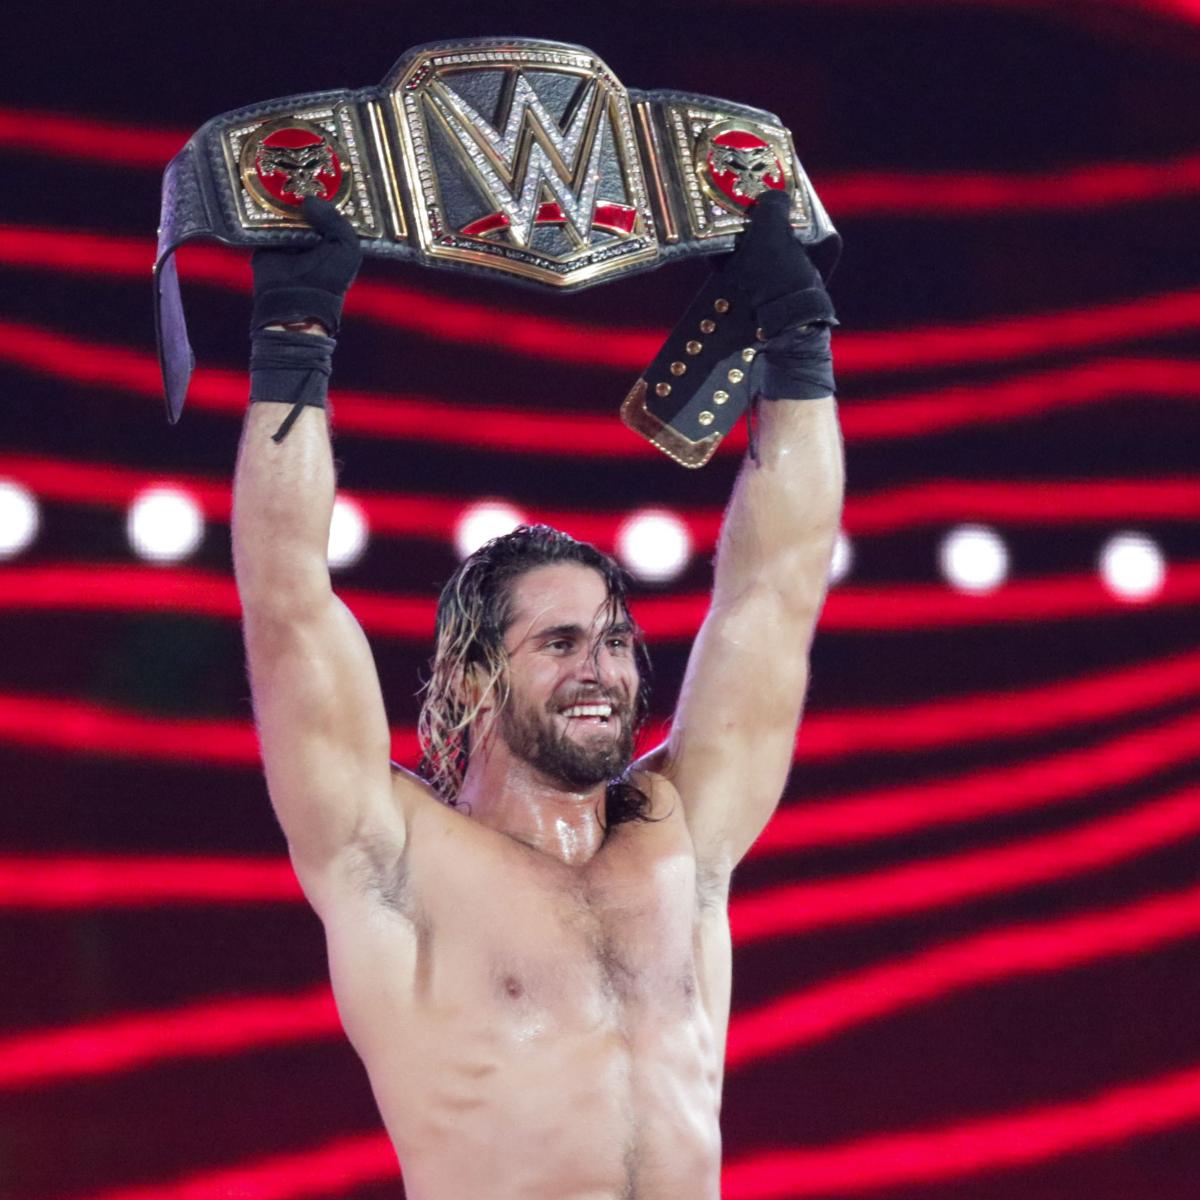 Seth Rollins' Most Memorable Matches, Moments in WrestleMania History